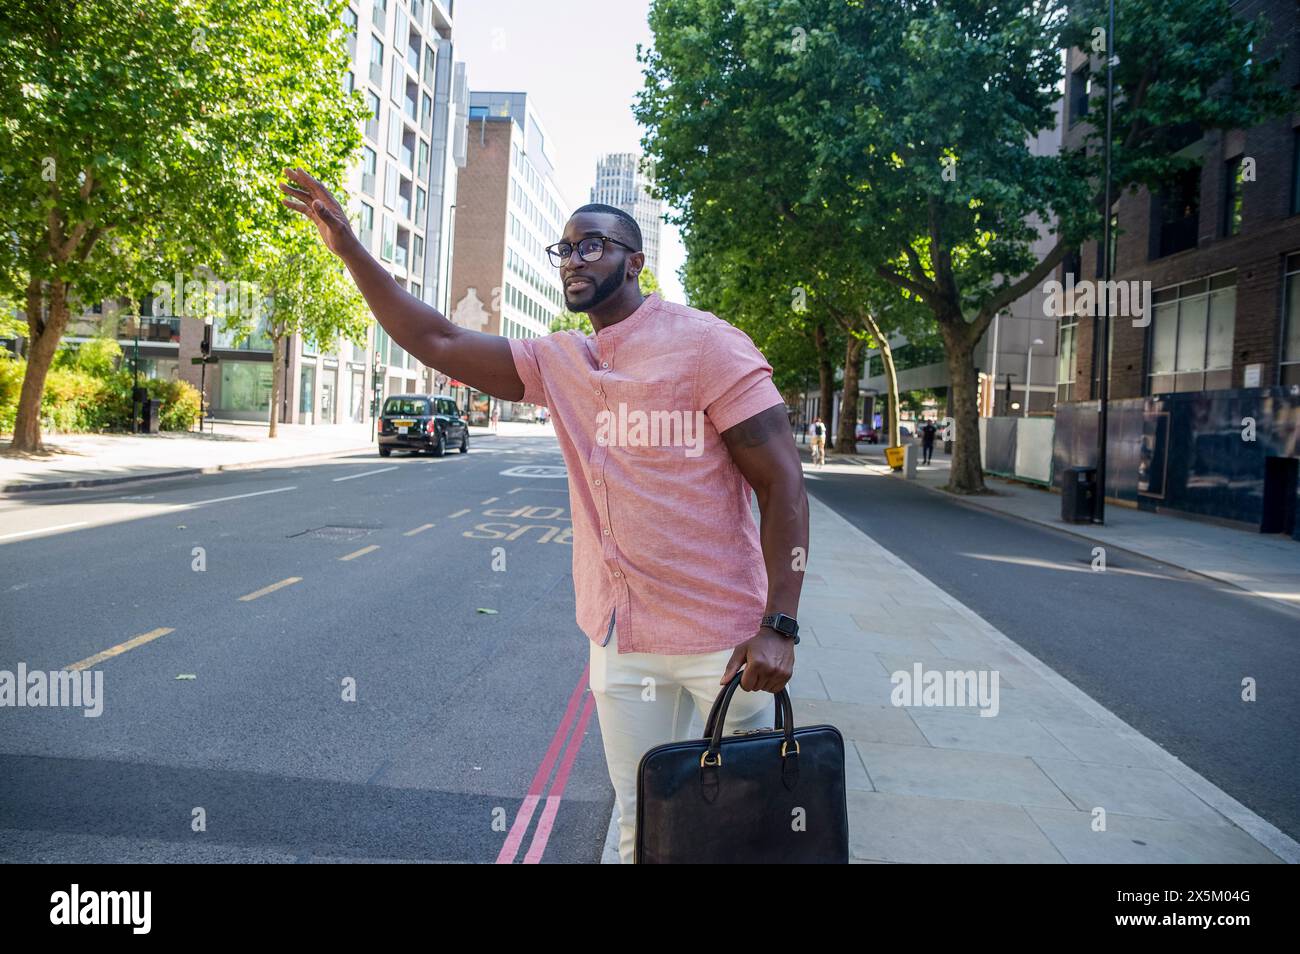 Man with briefcase standing on street and waving for transport Stock Photo